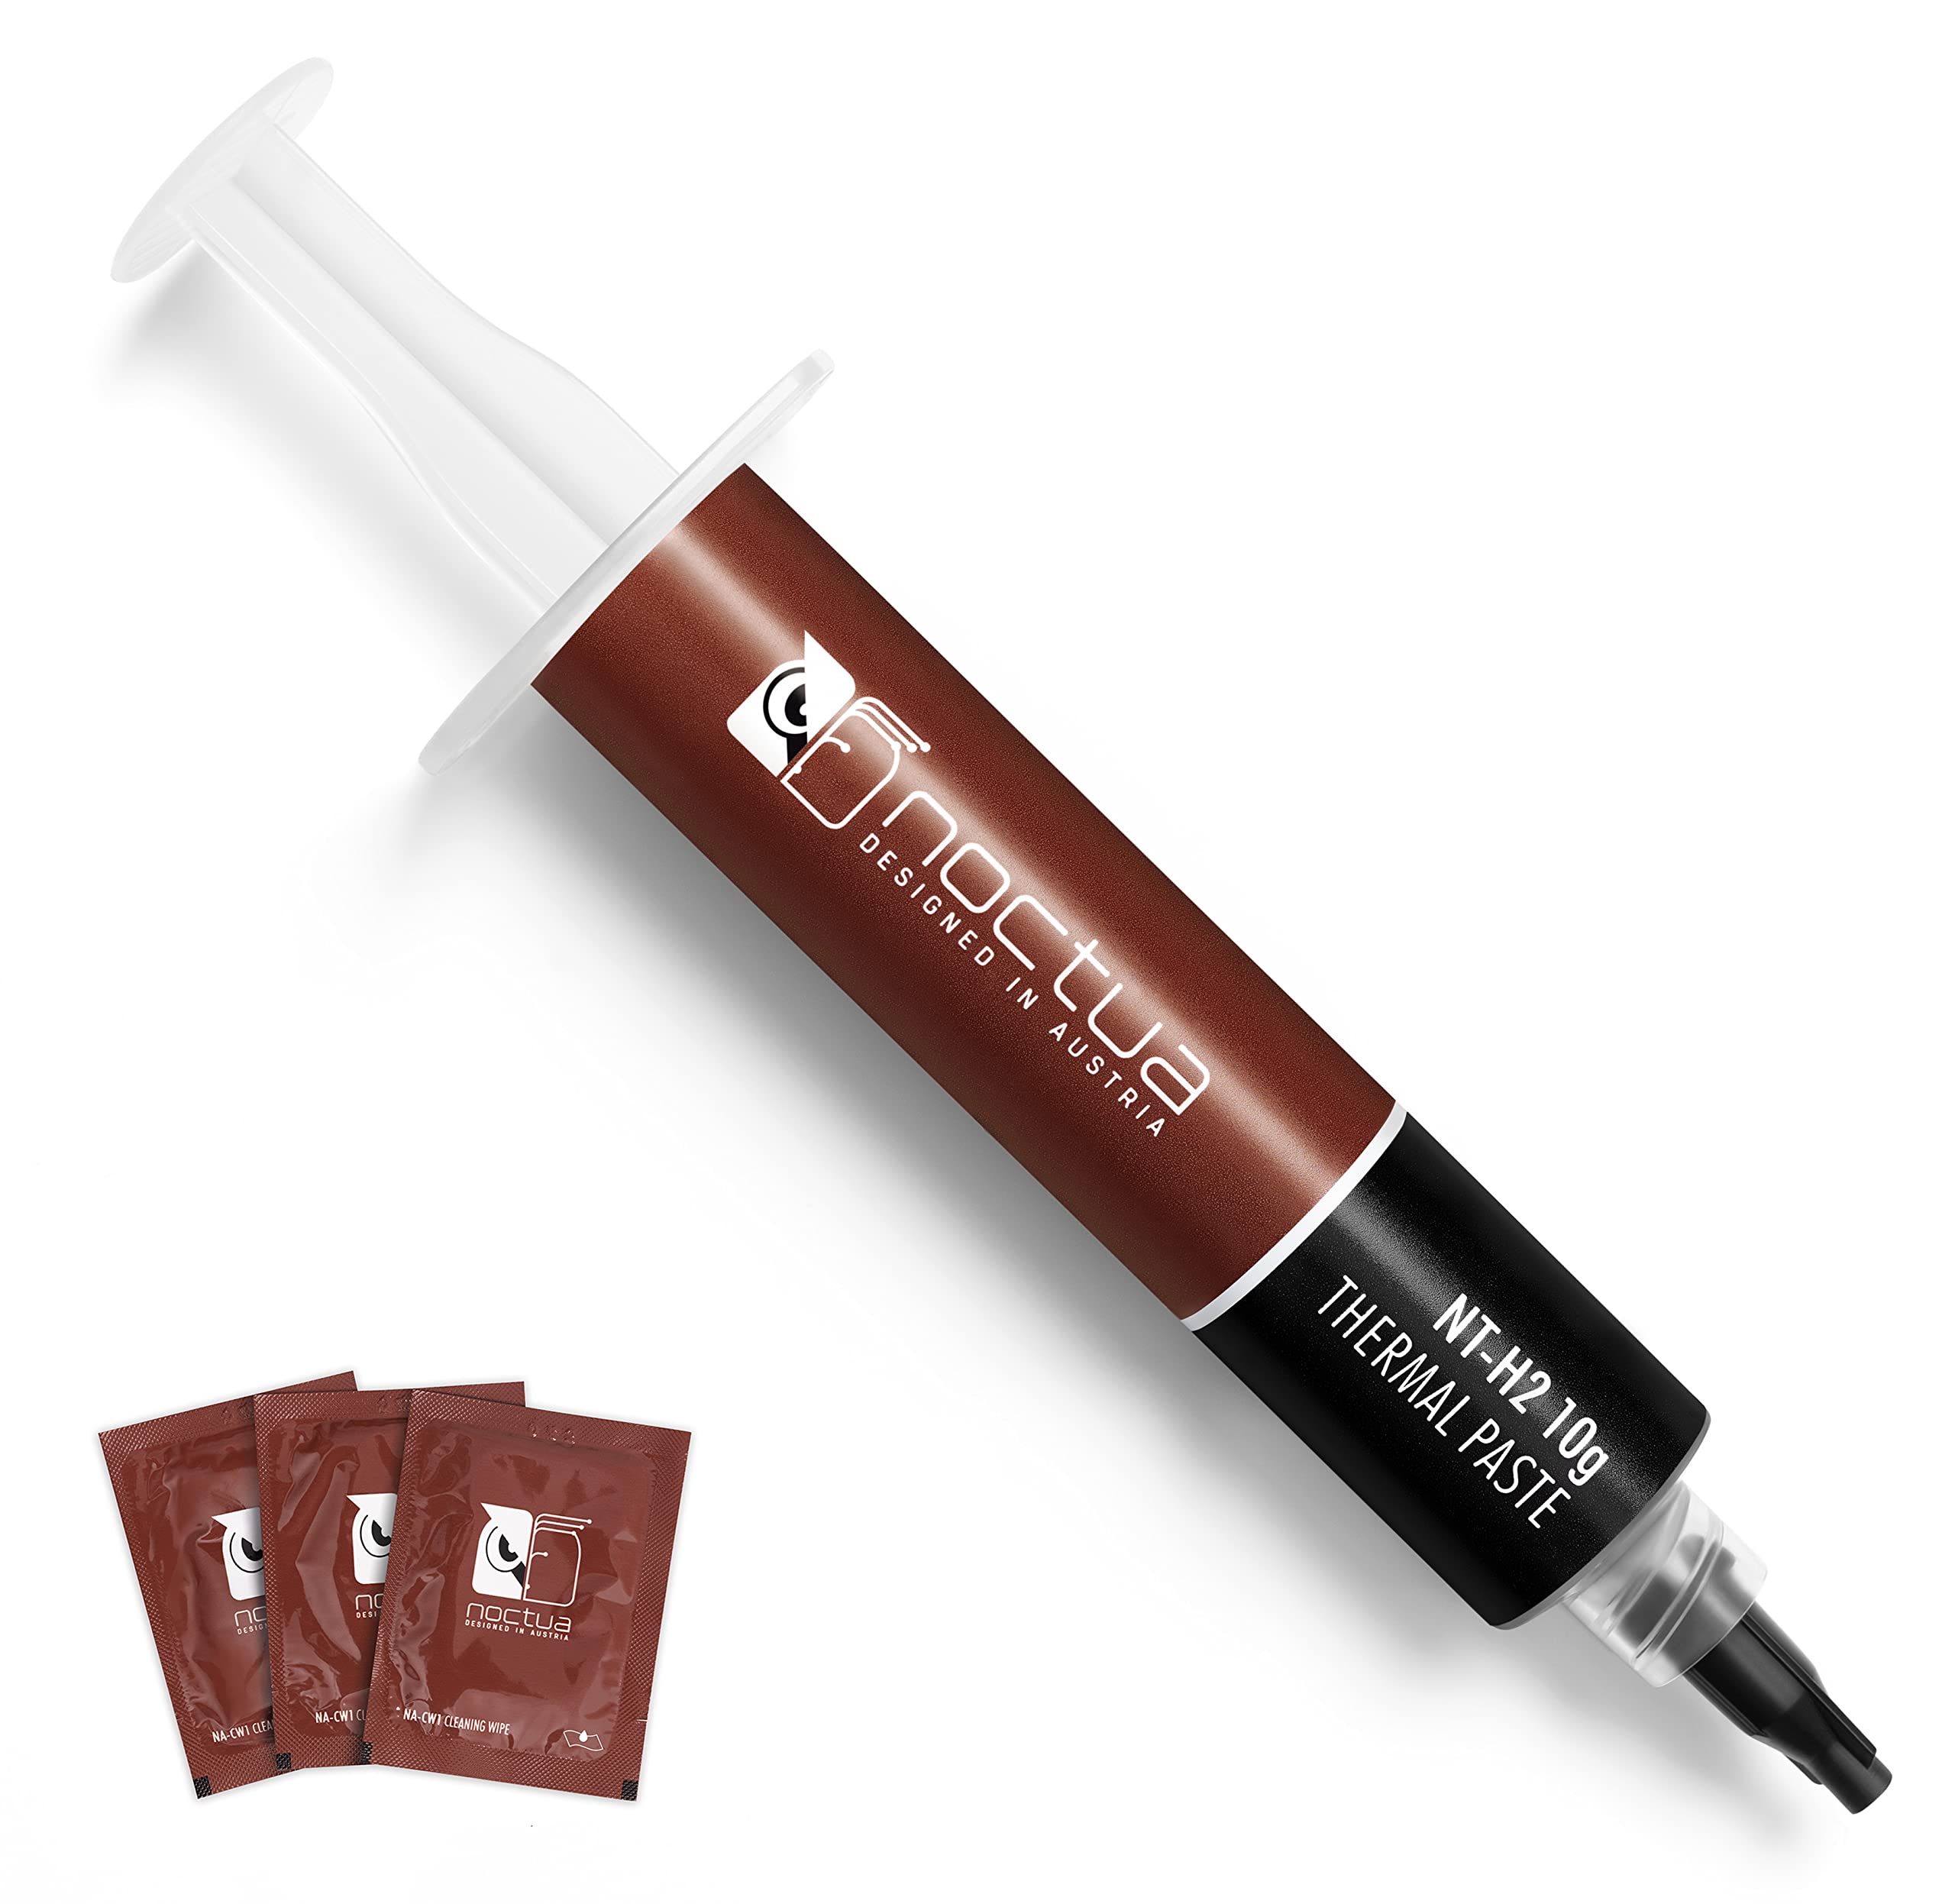 Noctua NT-H2 10g, Thermal Computer Paste incl. 10 Cleaning Wipes (10g)